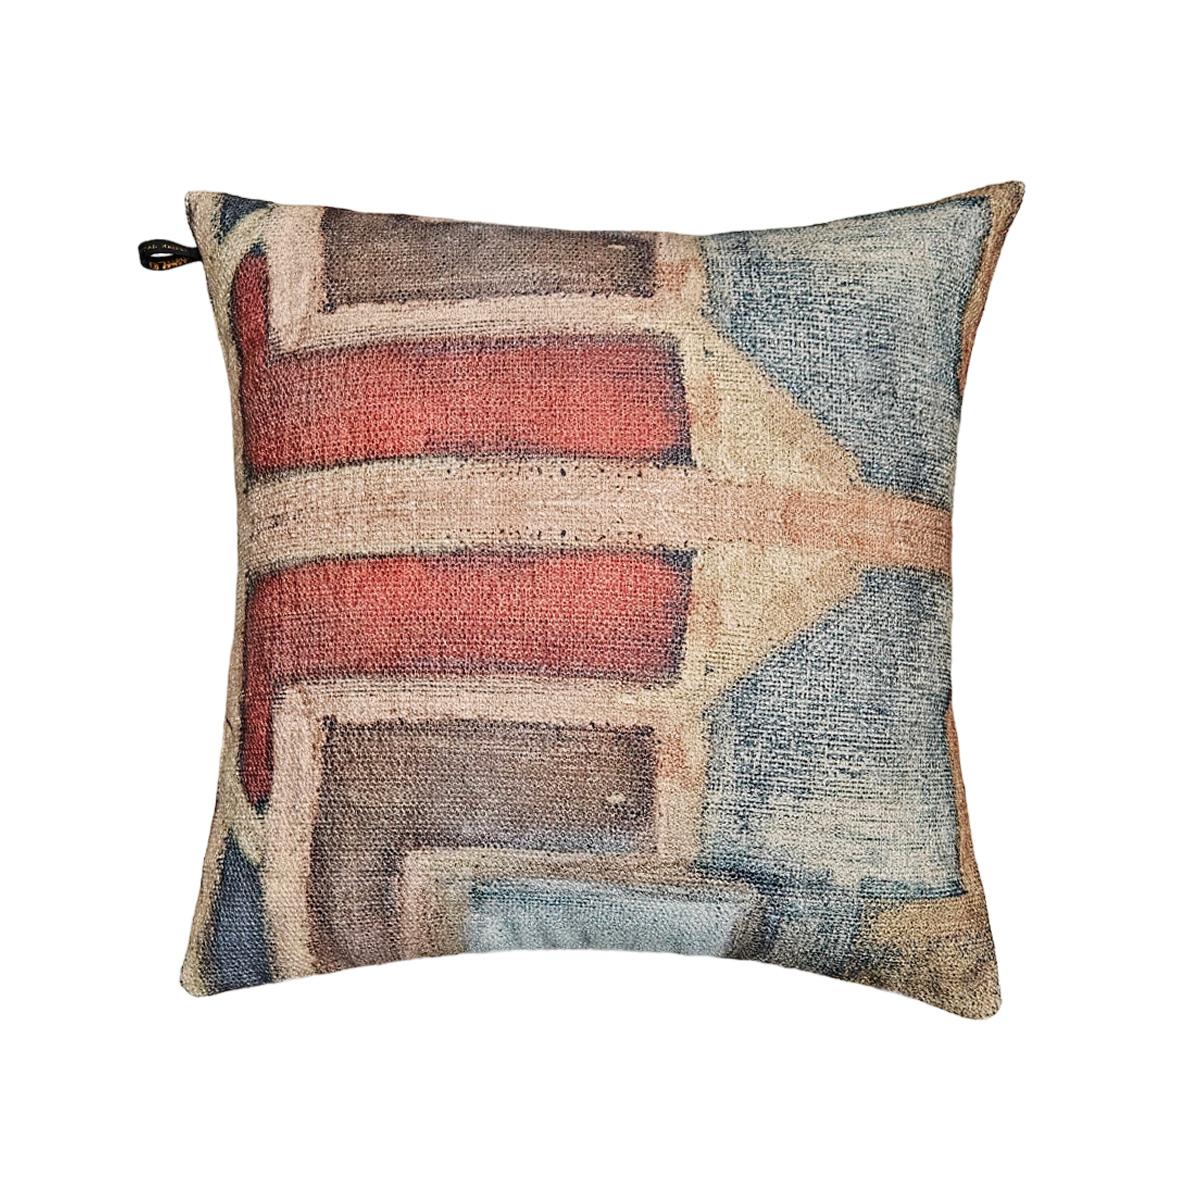 EST1966 Pas03
Inspiration: handpainted by Chantal Keizer
Material: 100% Polyster 
Size 50-50 cm 19-19 Inch
Inner Pillow : down feathers

Chantal Keizer, the founder of EST1966, is an Amsterdam-based artist known for her collecties. With a focus on